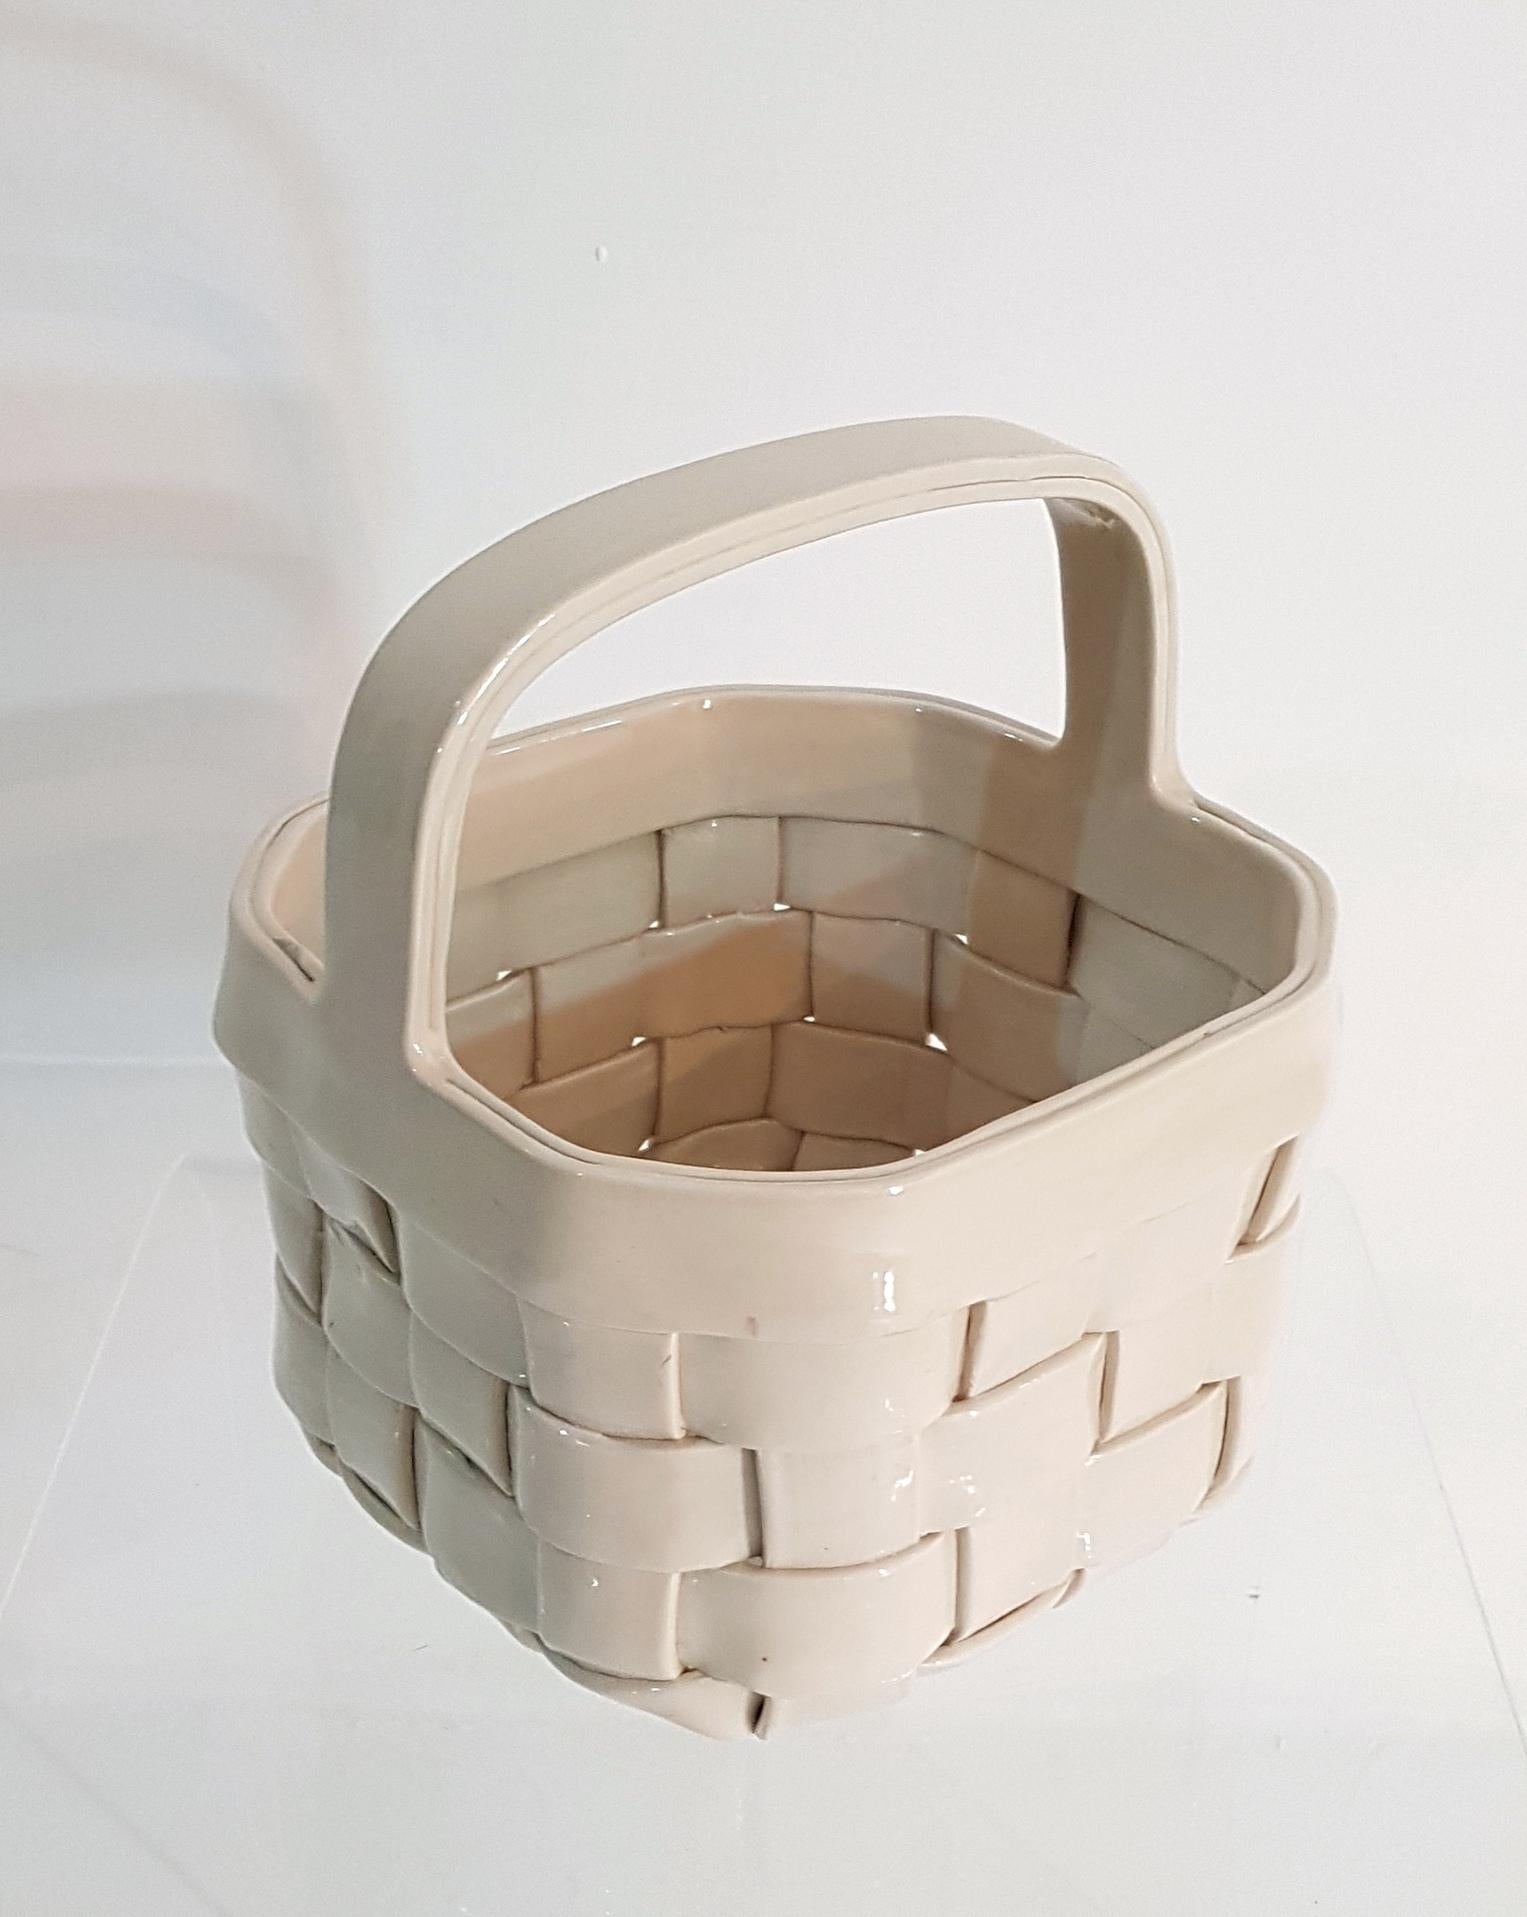 Hand and made basket in ceramic in ivory. Marked underneath 